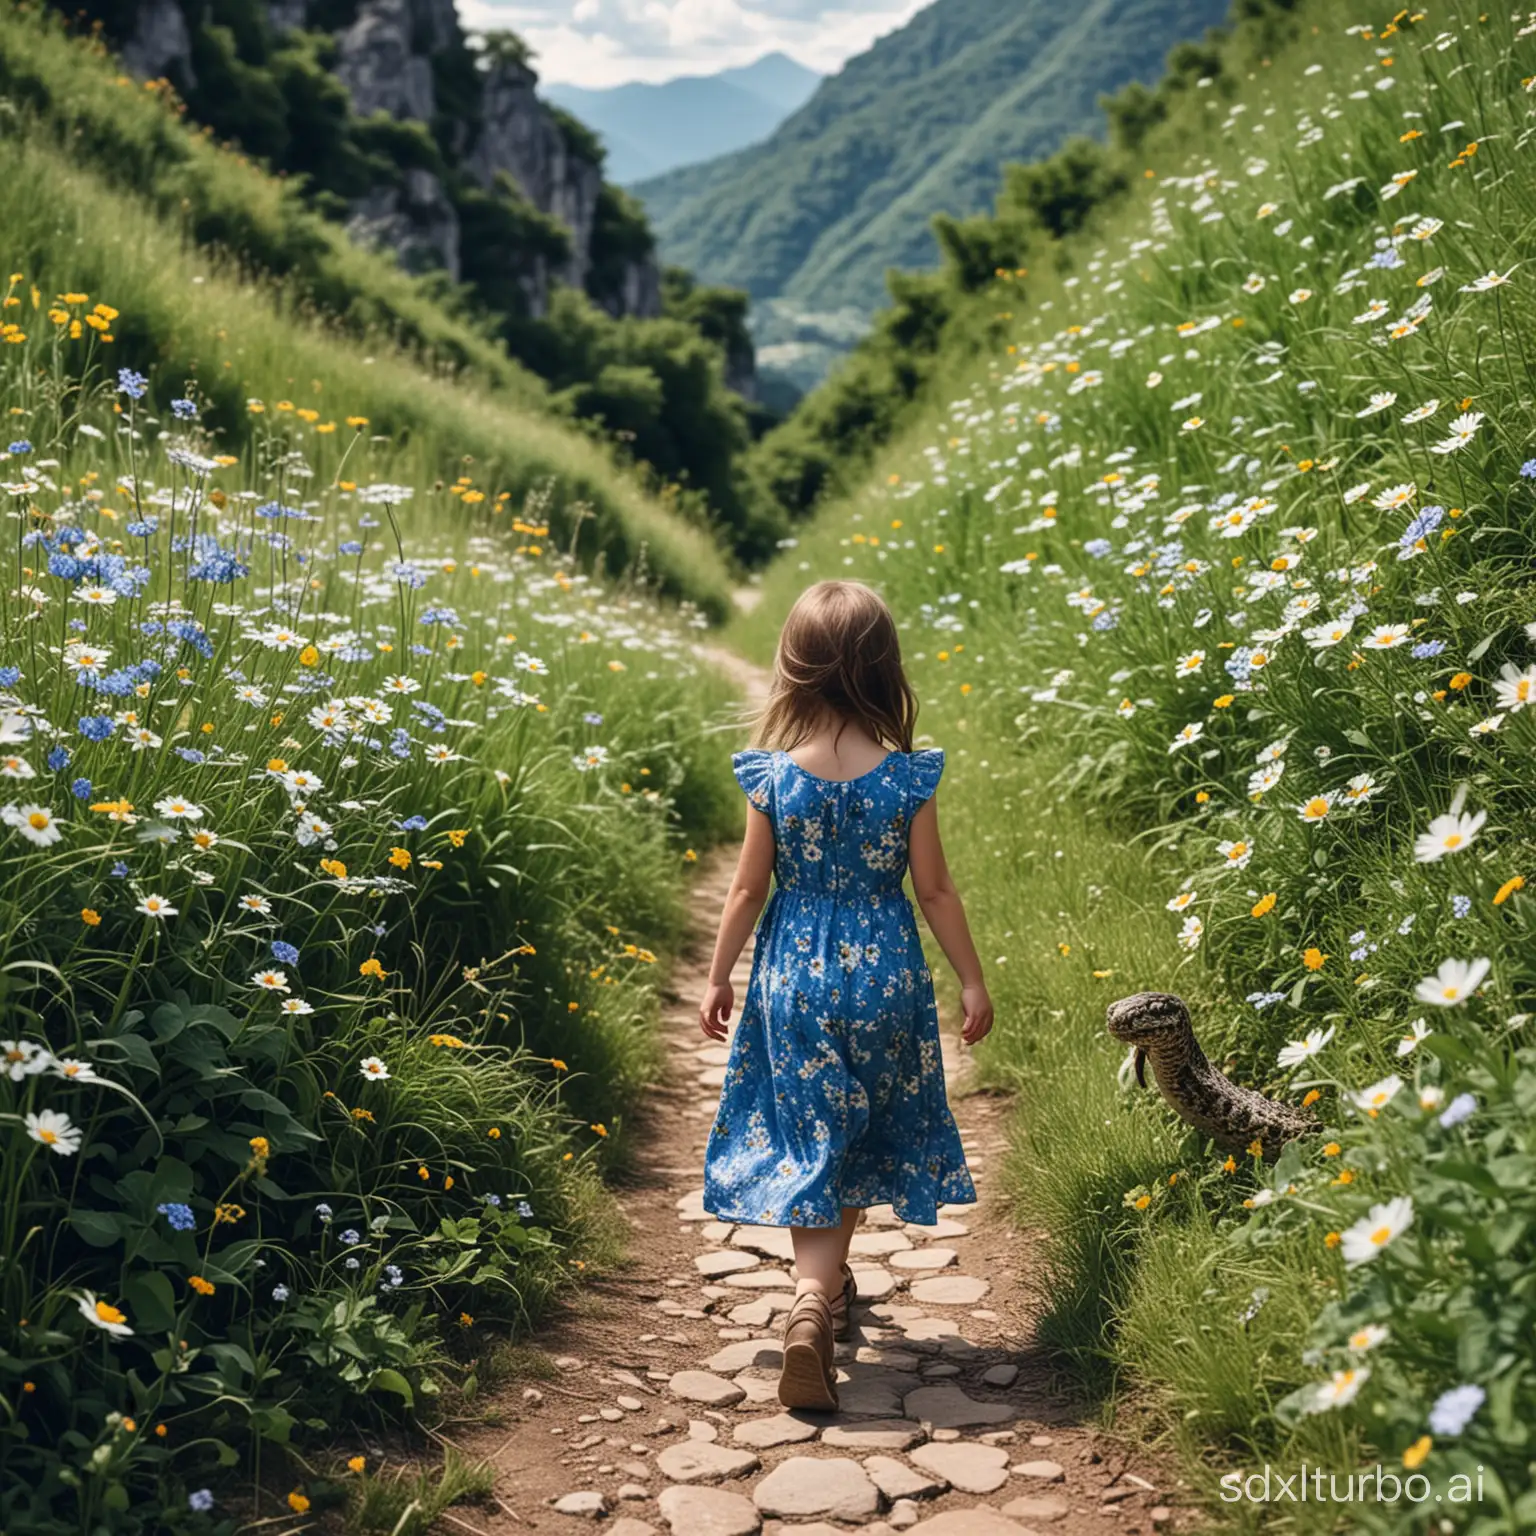 Girl-in-Blue-Floral-Dress-Encounters-Python-on-Mountain-Path